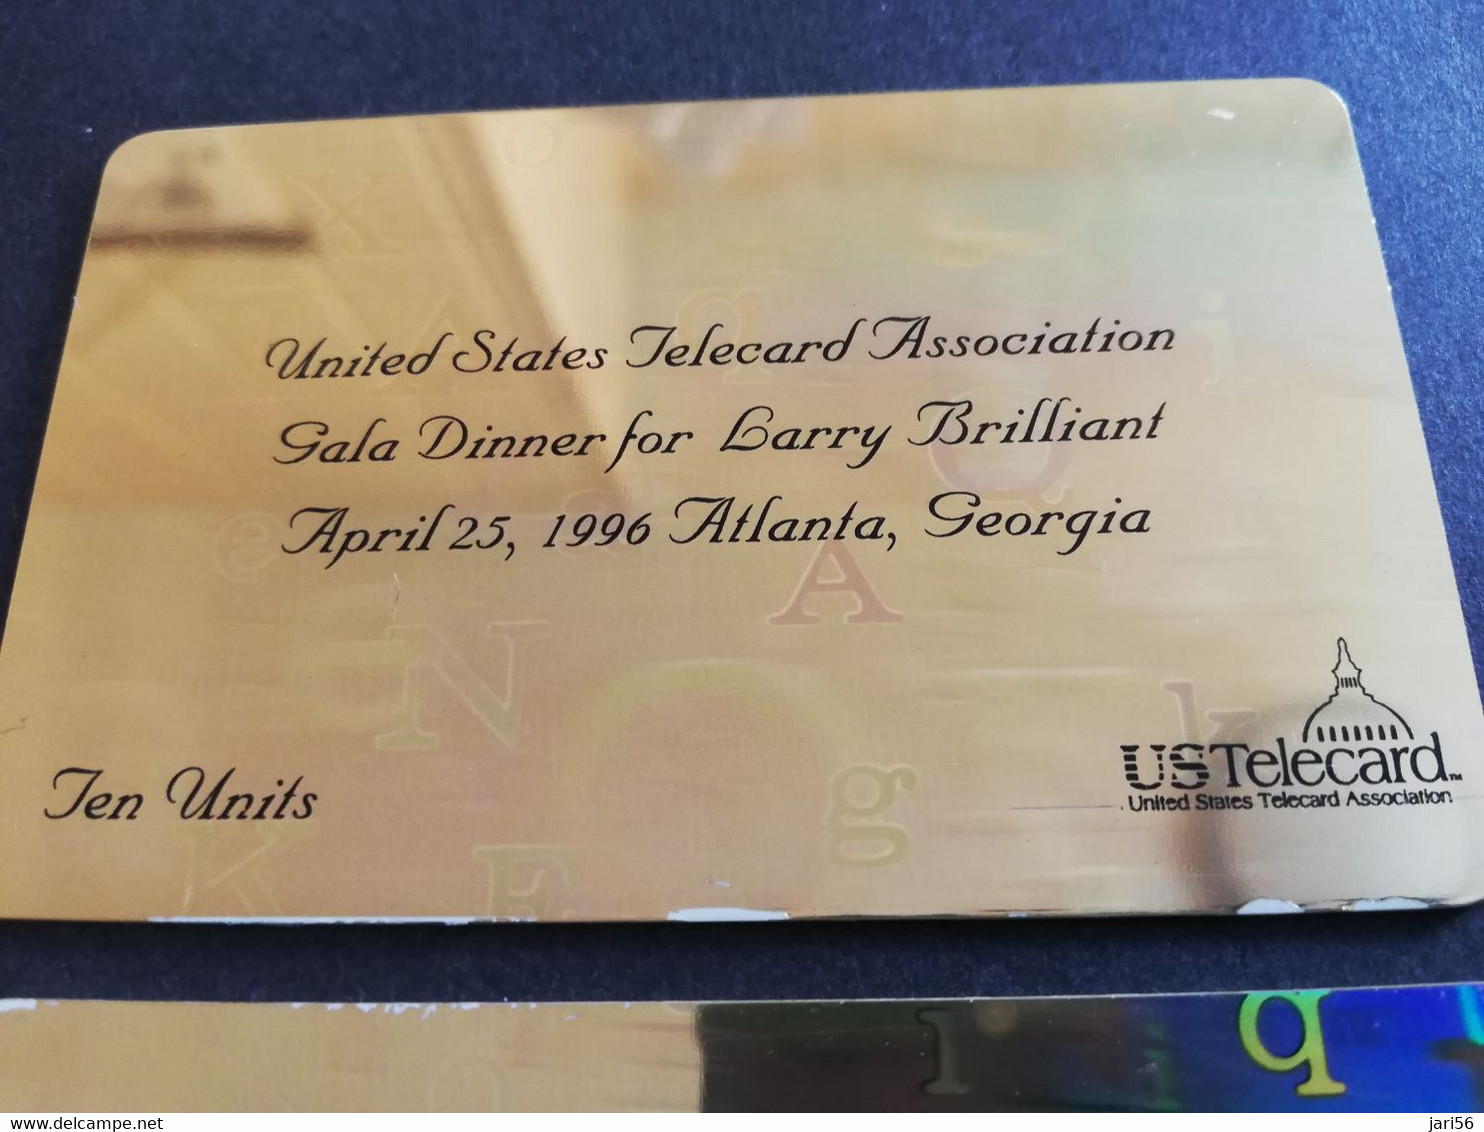 UNITED STATES  US TELECARD/ GALA DINER FOR LARRY BRILLIANT - GOLD  CARD/ HOLOGRA   LIMITED EDITION   MINT CARD ** 6117** - Colecciones